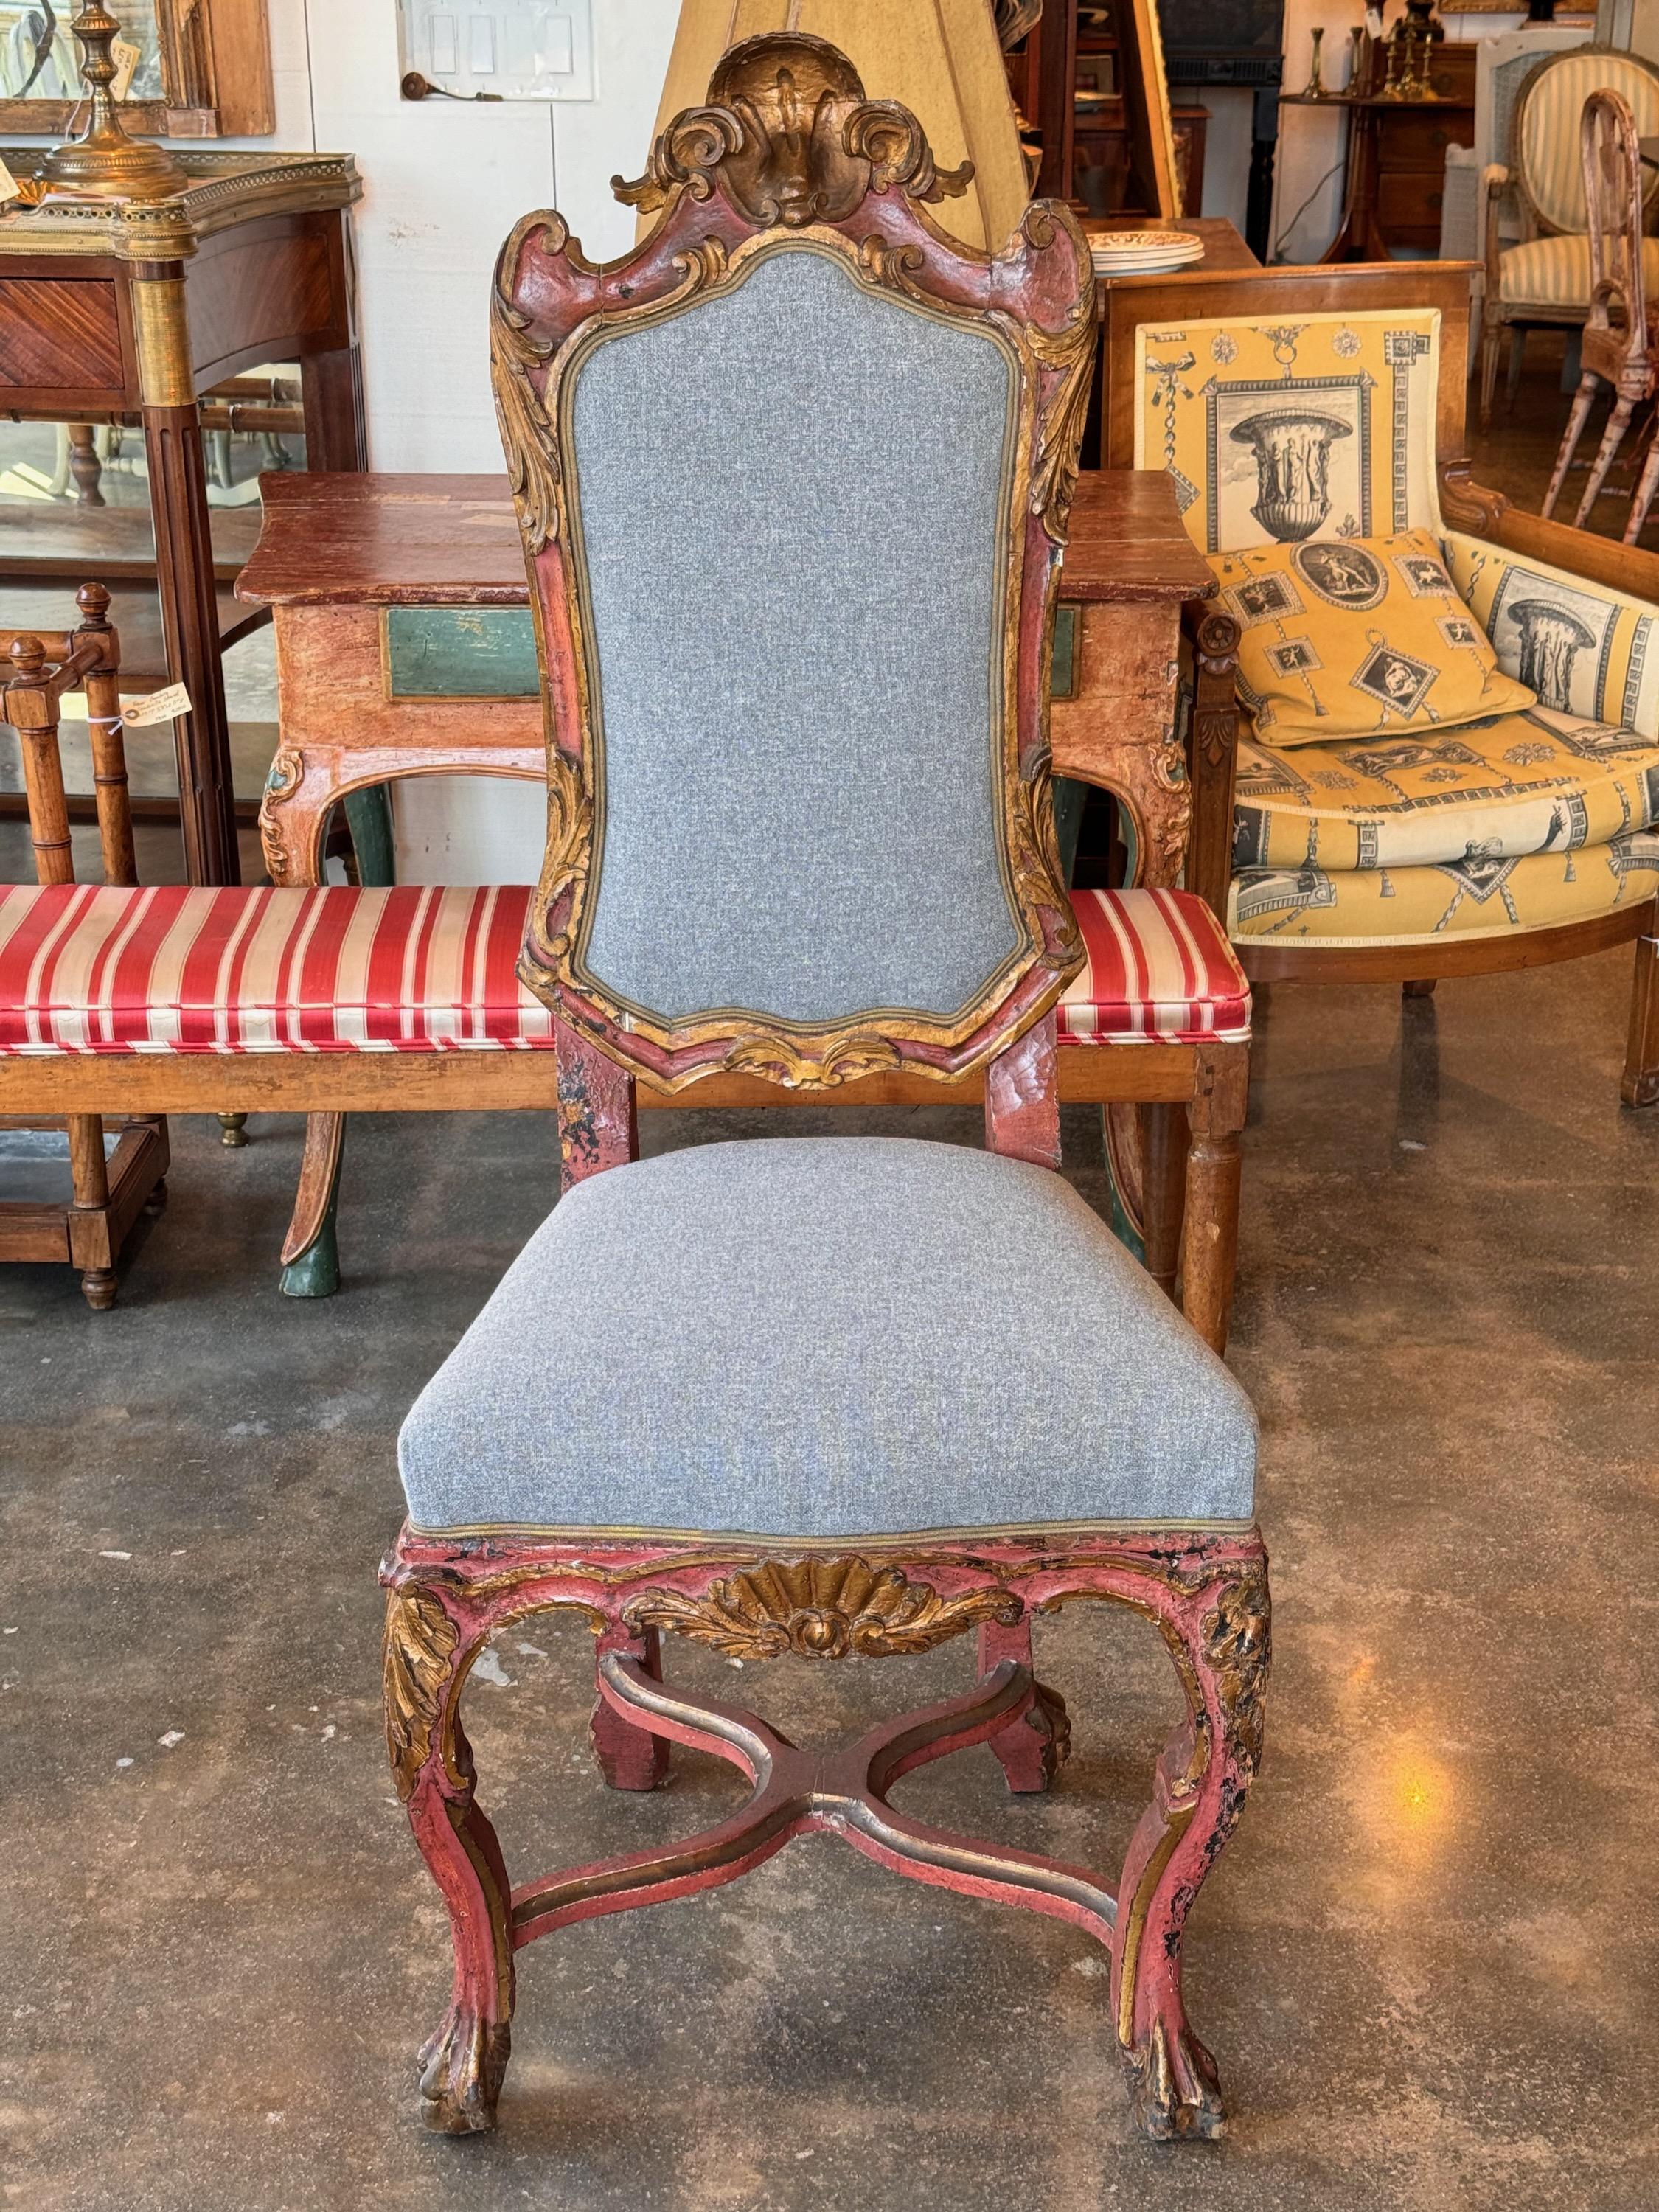 One of the prettiest side chairs you will ever see. This is Venetian and ready for your home.